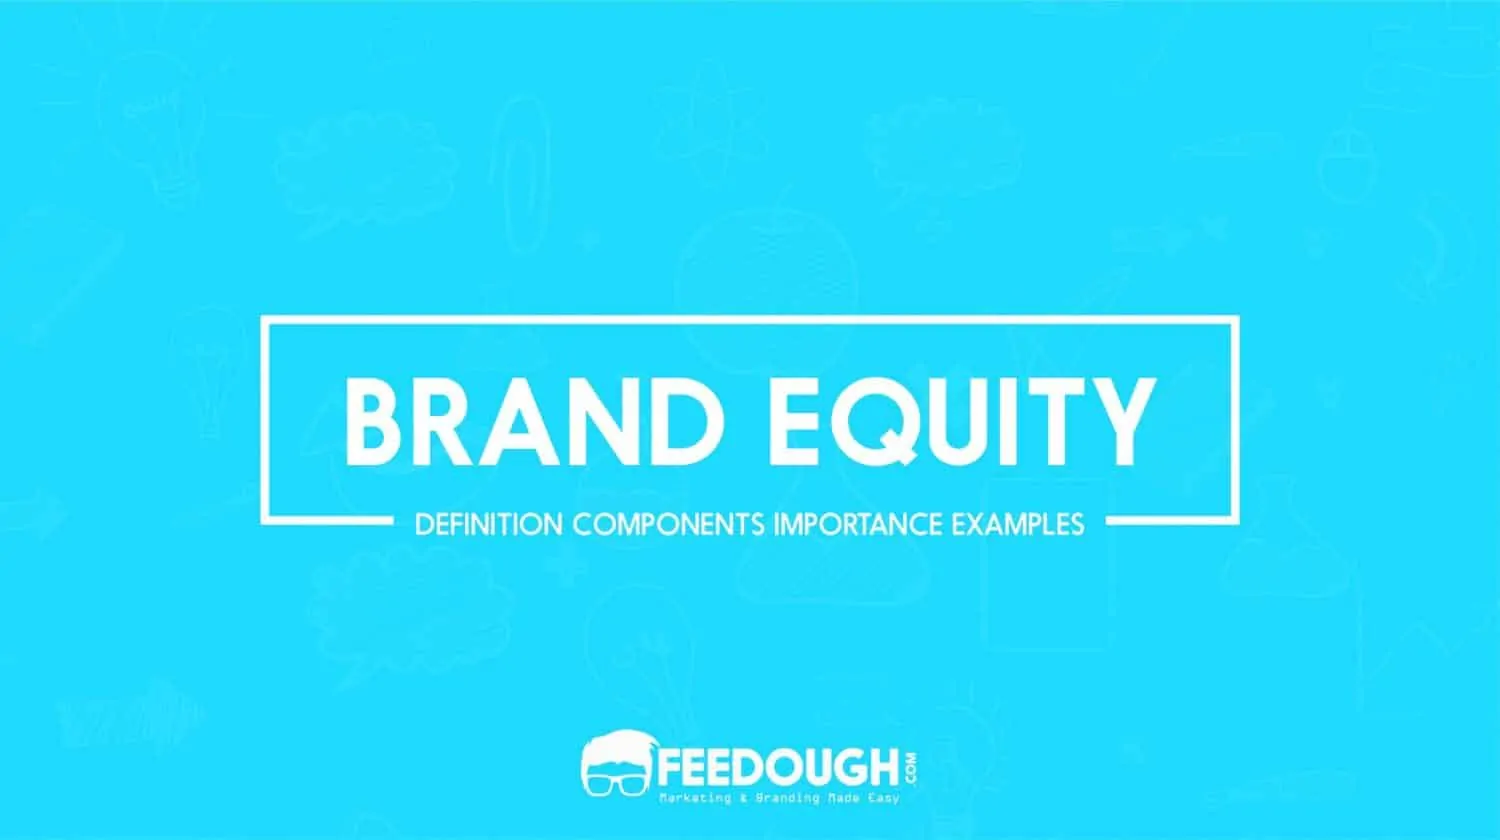 What Is Brand Equity? Why Is It Important?